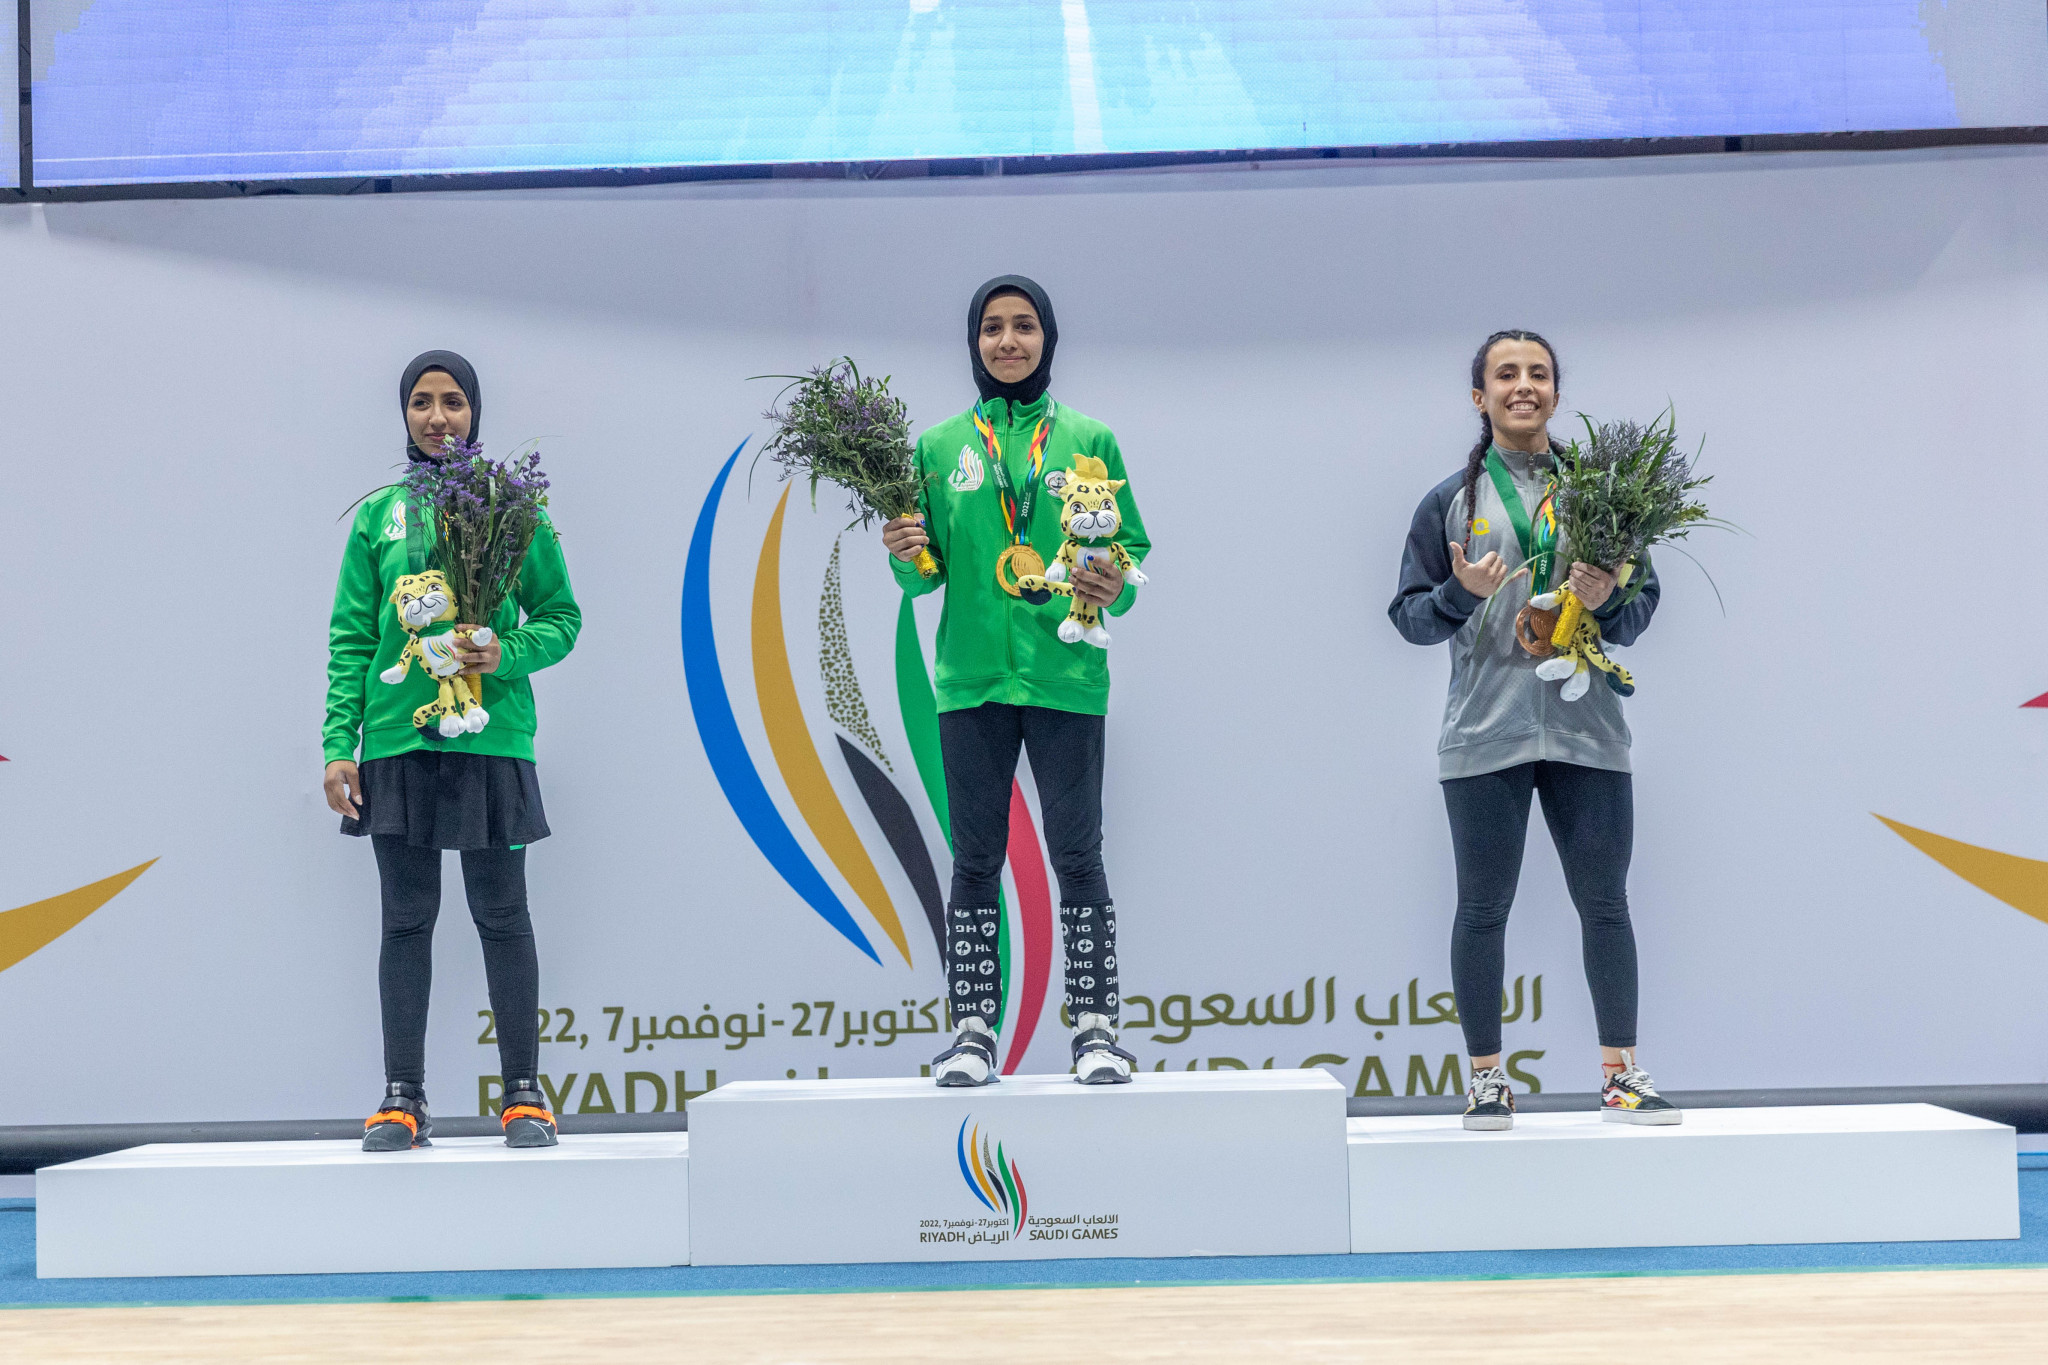 Weightlifter Alkhawahr makes history as first Saudi Games gold medallist